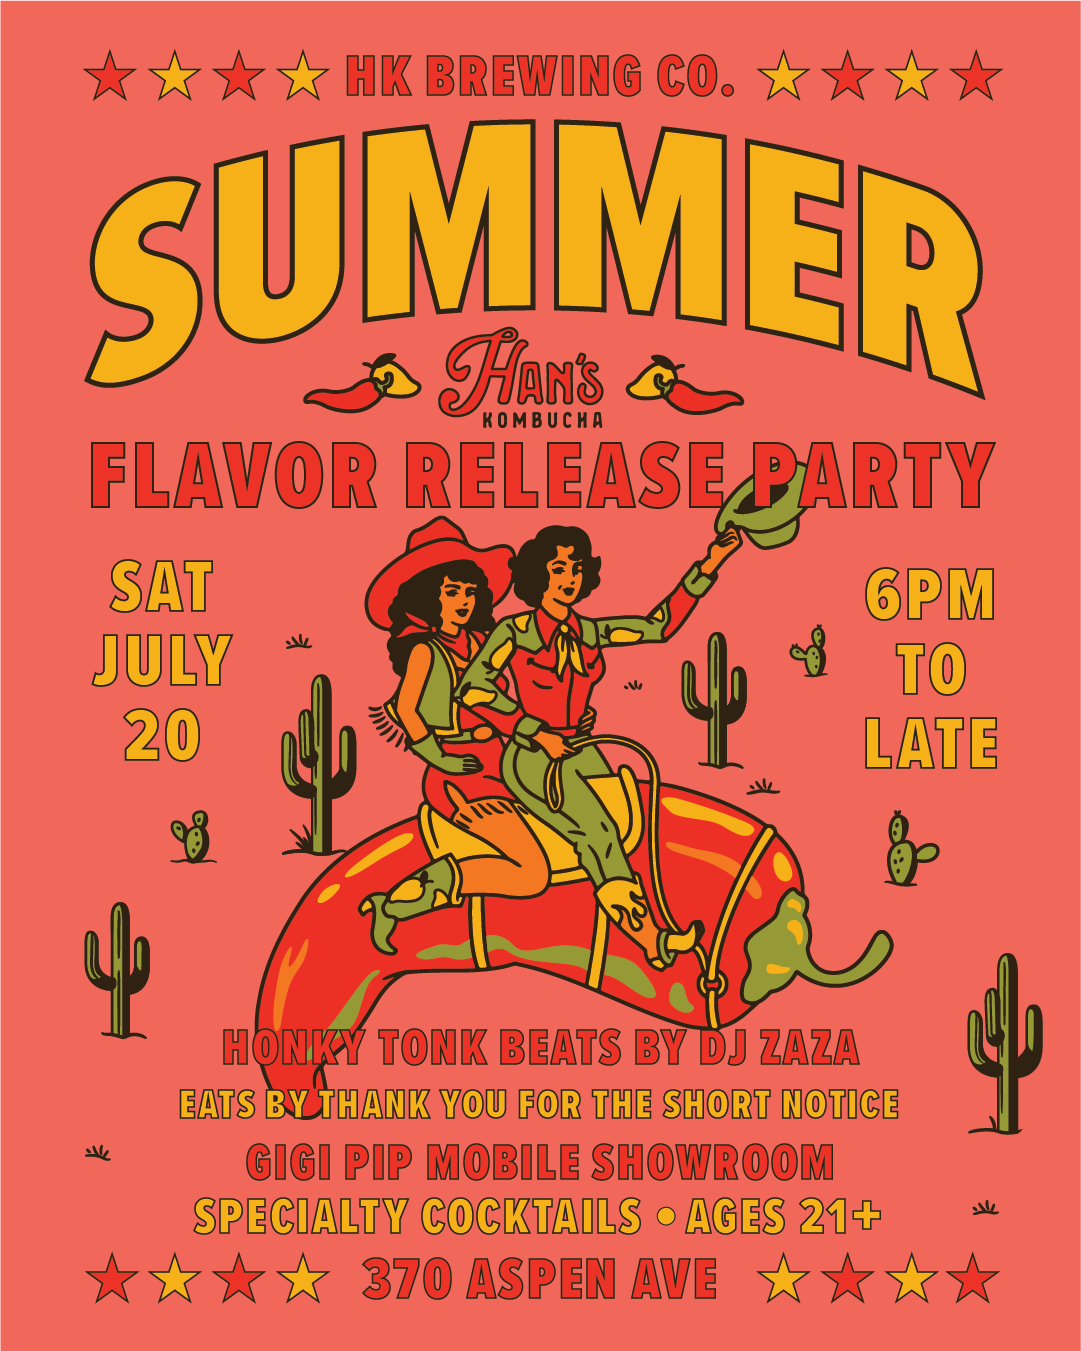 Han's Kombucha Summer Flavor Release Party at HK Brewing